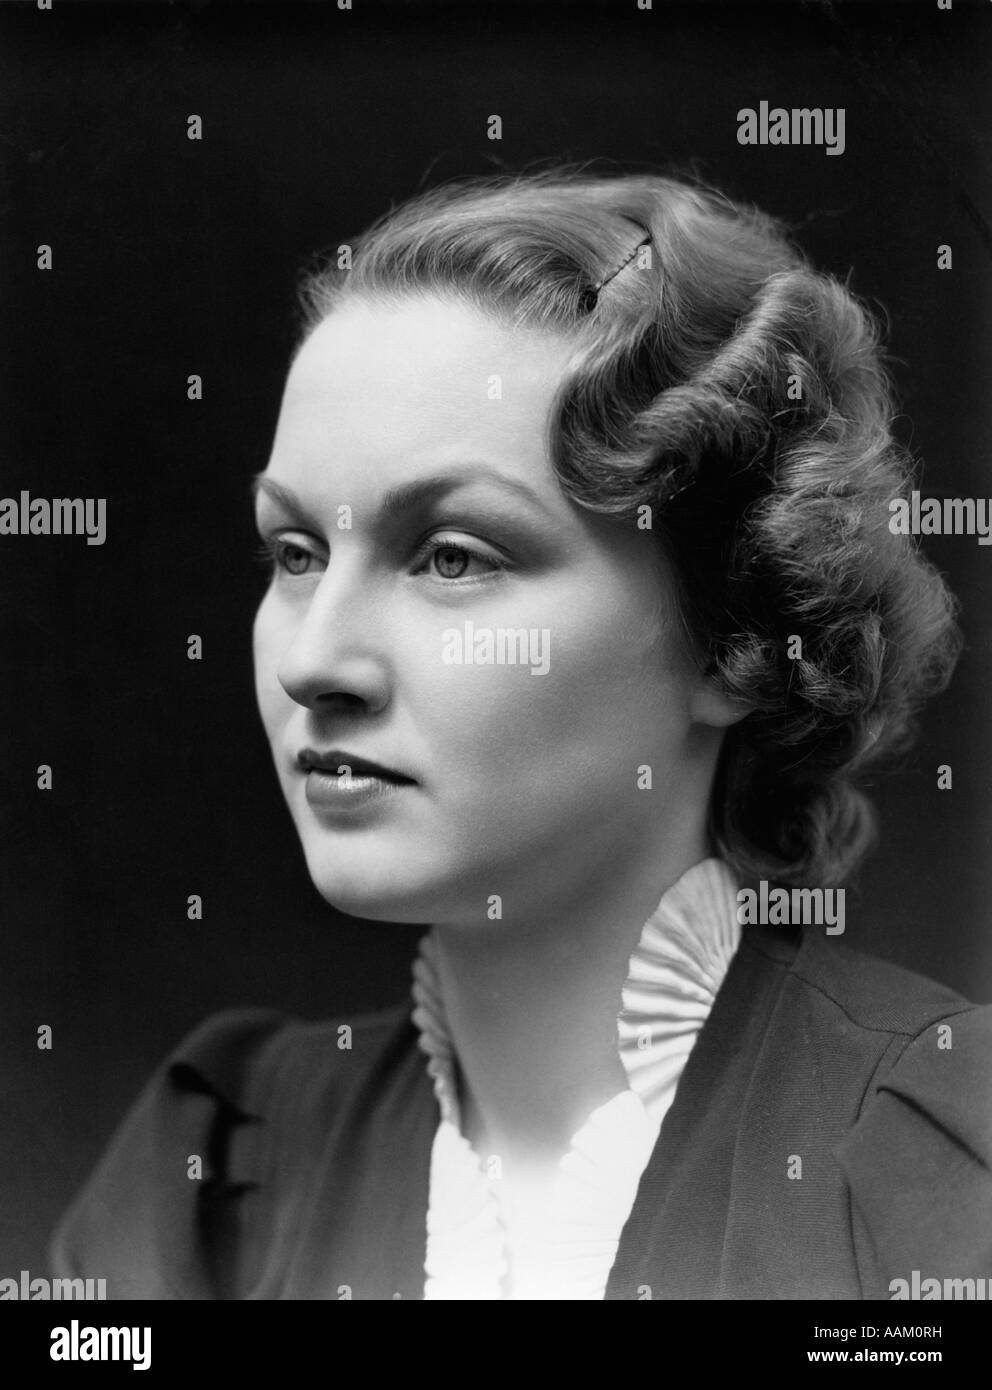 1930s PORTRAIT OF BRUNETTE WOMAN LOOKING OFF TO THE SIDE WITH A BLANK EXPRESSION WEARING A WHITE RUFFLED COLLAR Stock Photo